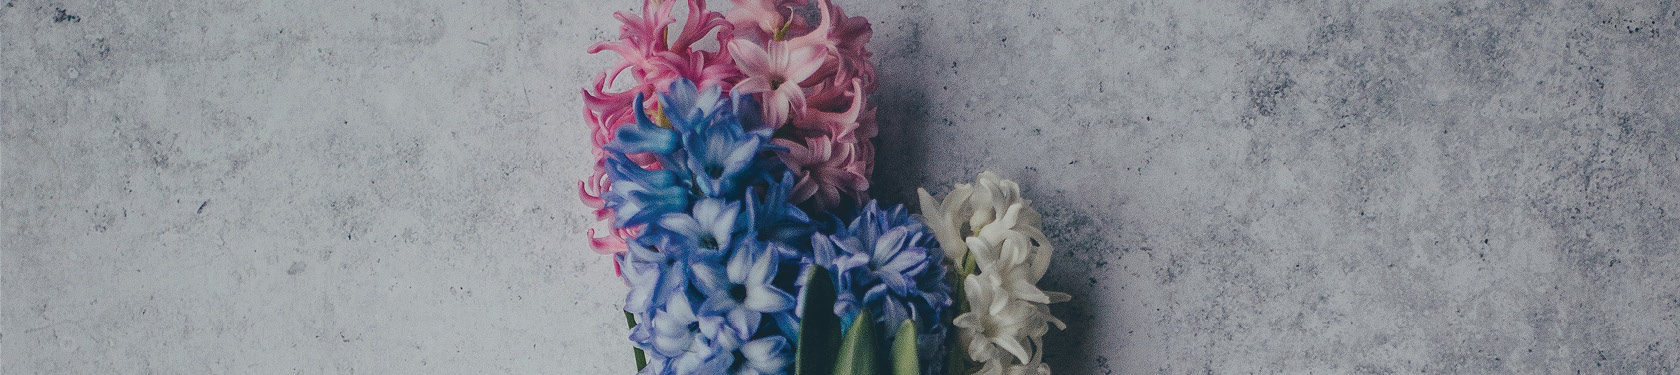 Blue, pink and white flowers commemorate the Trans Day of Remembrance.